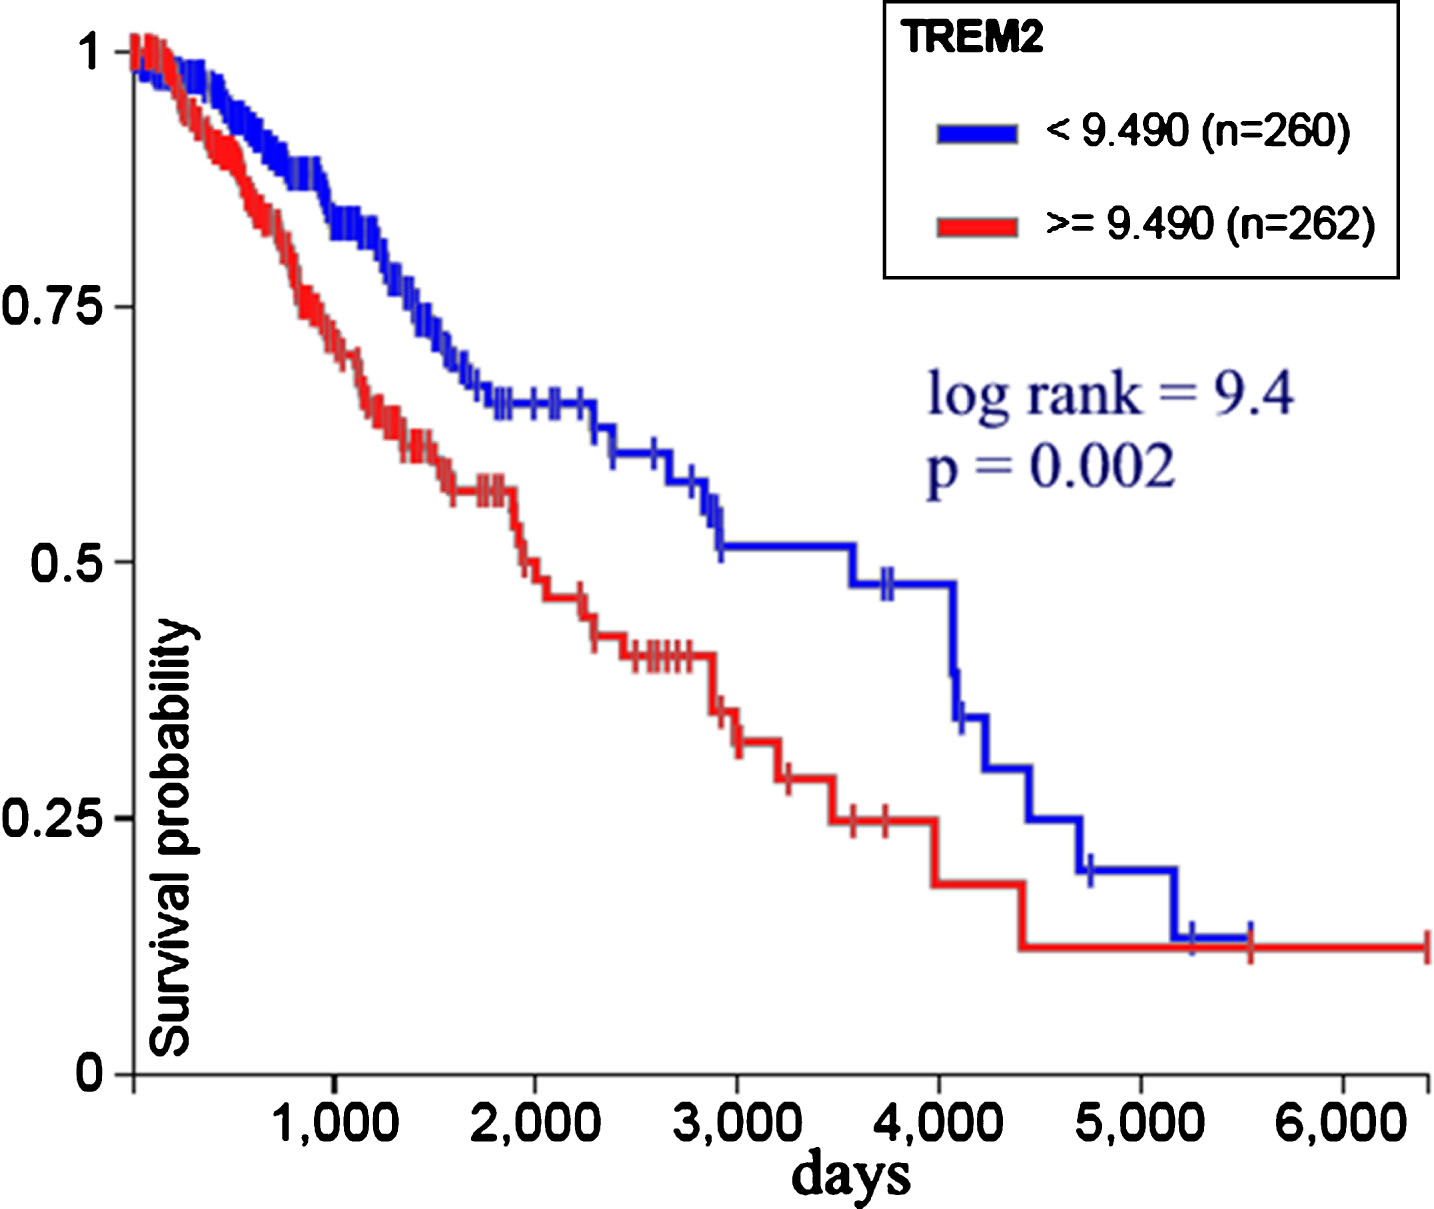 TREM2 gene expression versus survival probability in 522 low grade glioma patients from TCGA. Less expression is associated with better survival (UCSC Xena, http://xena.ucsc.edu).